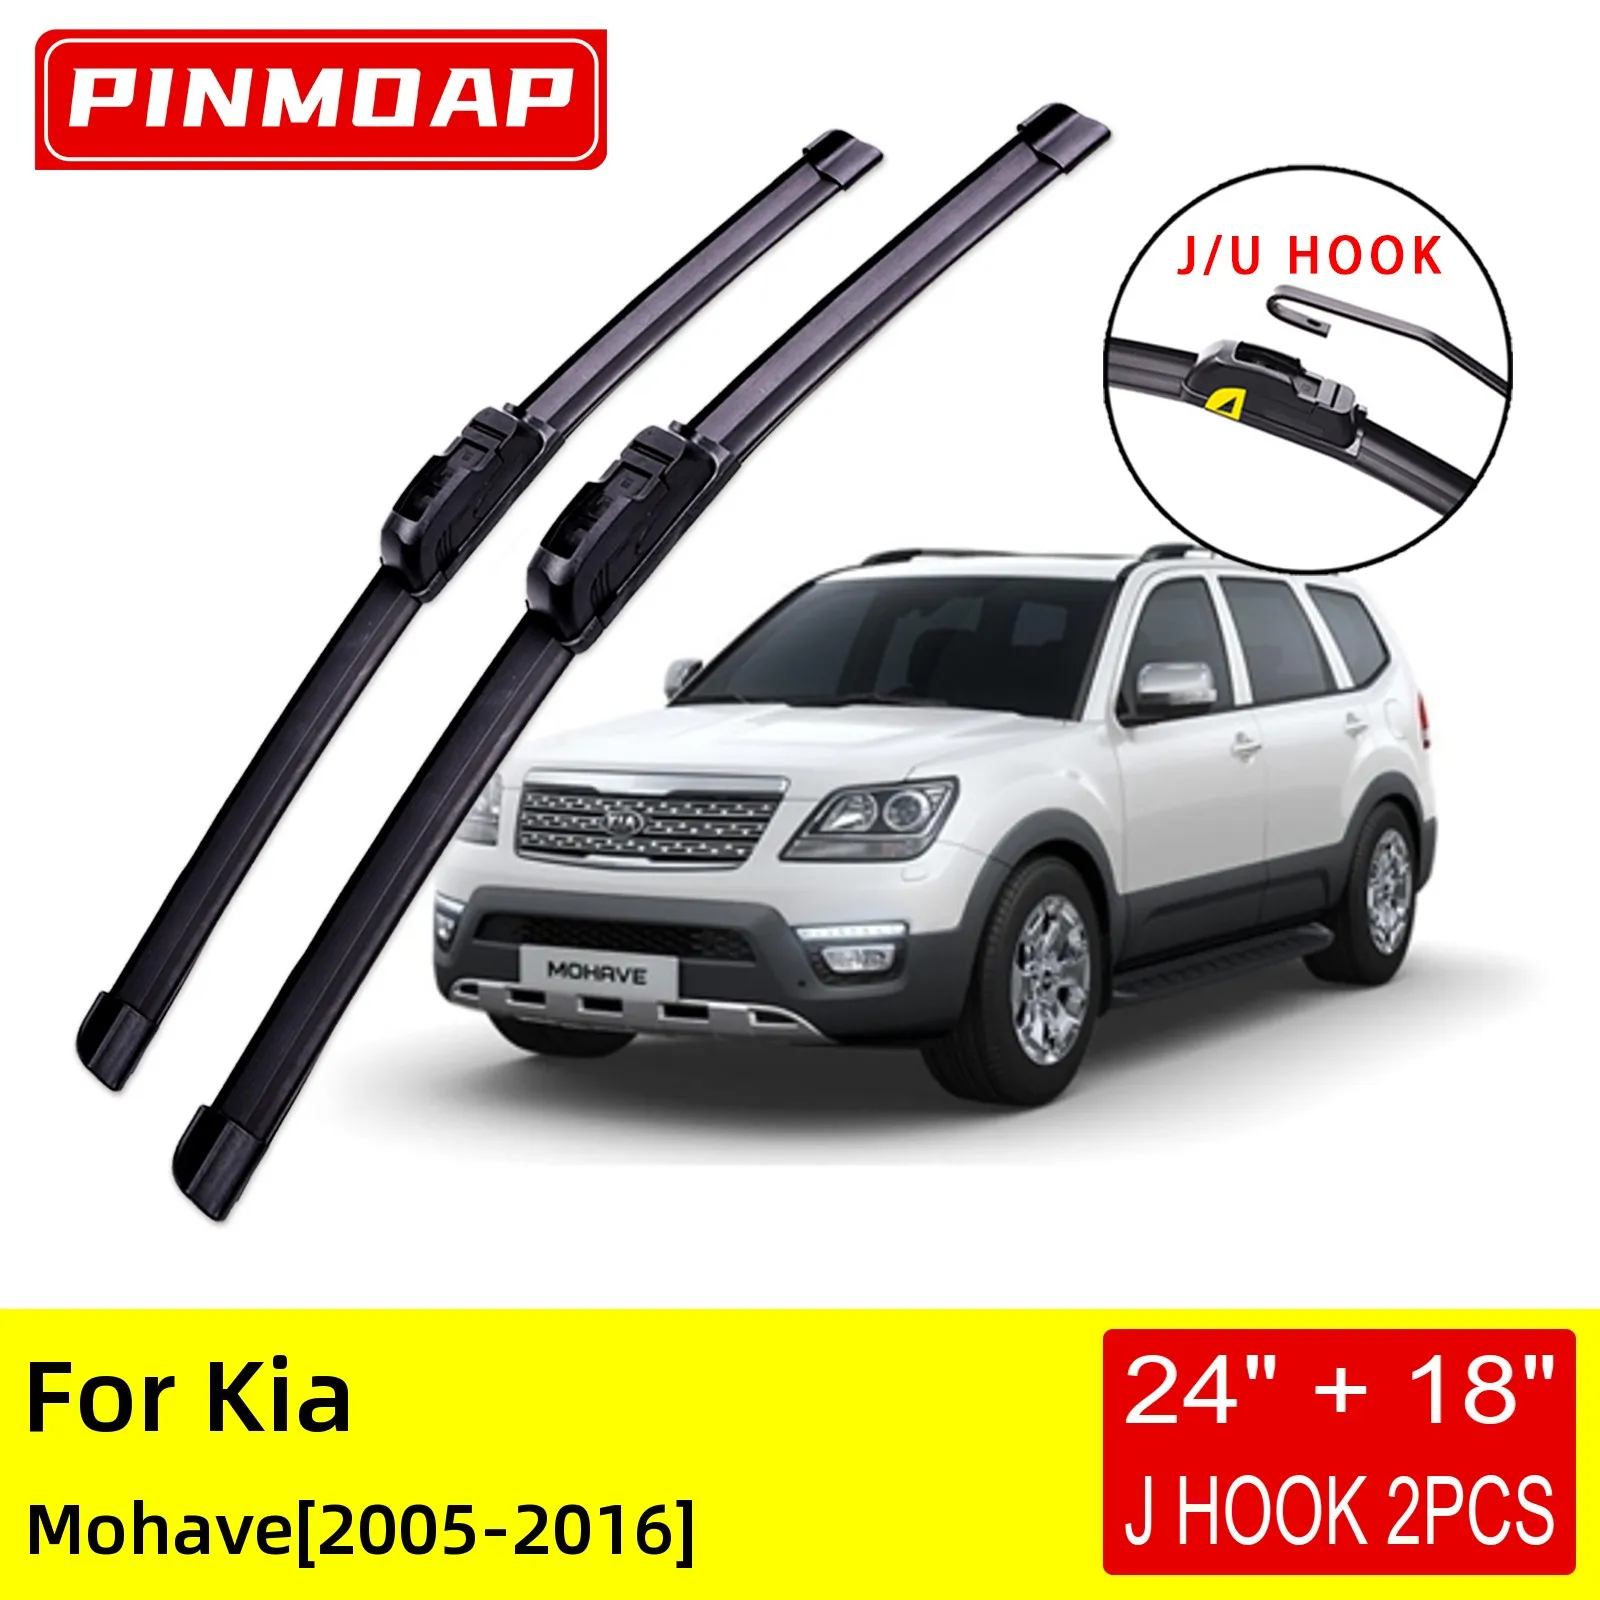 For Kia Mohave 2006 2007 2008 2009 2010 2011 2012 2013 2014 2015 2016 Front Wiper Blades Brushes Cutter Accessories U J Hook